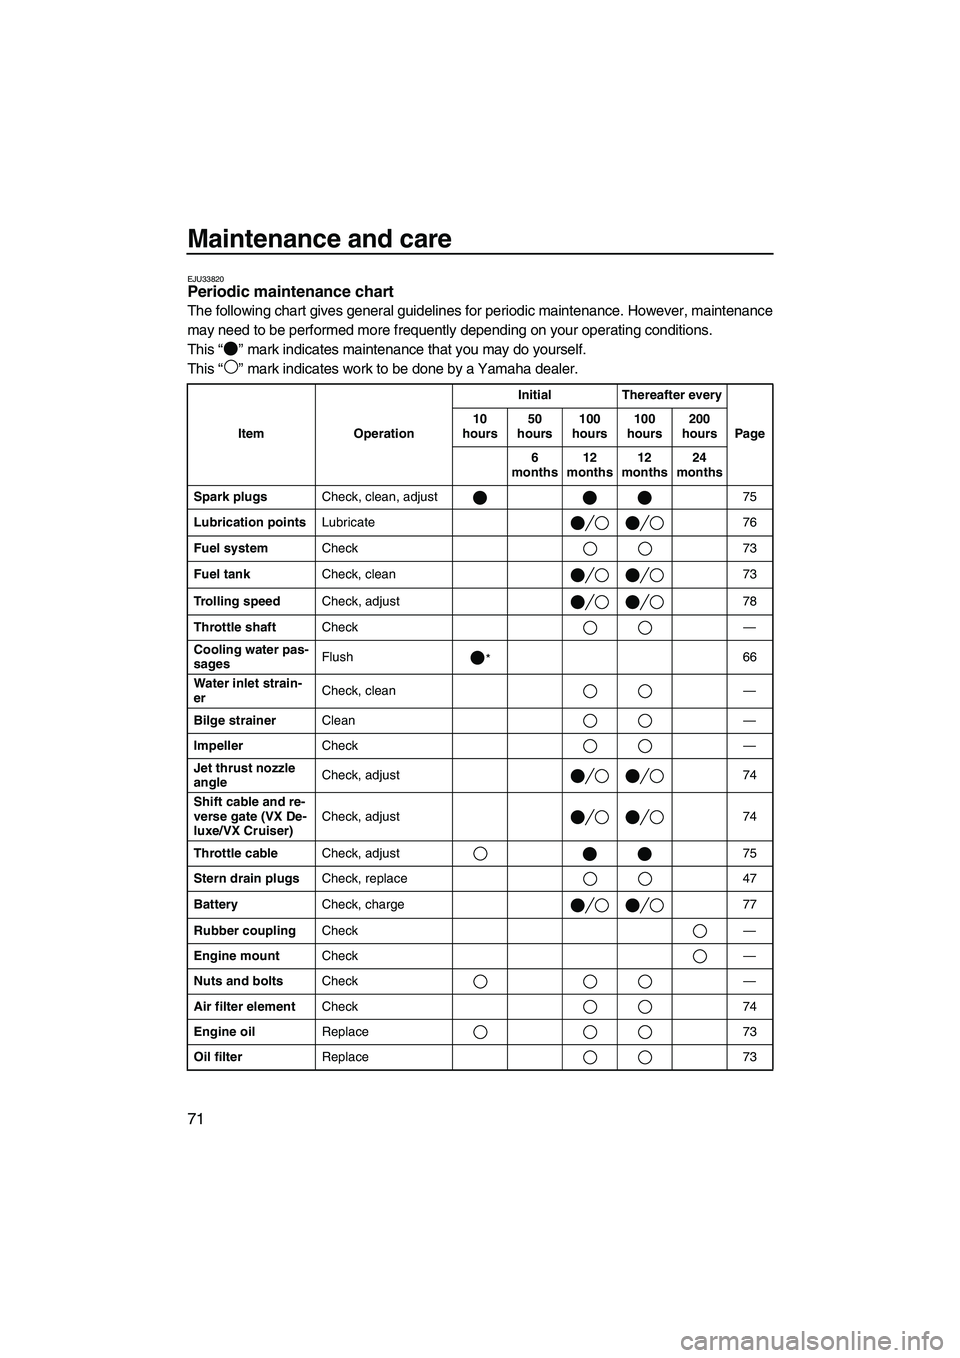 YAMAHA VX CRUISER 2007  Owners Manual Maintenance and care
71
EJU33820Periodic maintenance chart 
The following chart gives general guidelines for periodic maintenance. However, maintenance
may need to be performed more frequently dependi